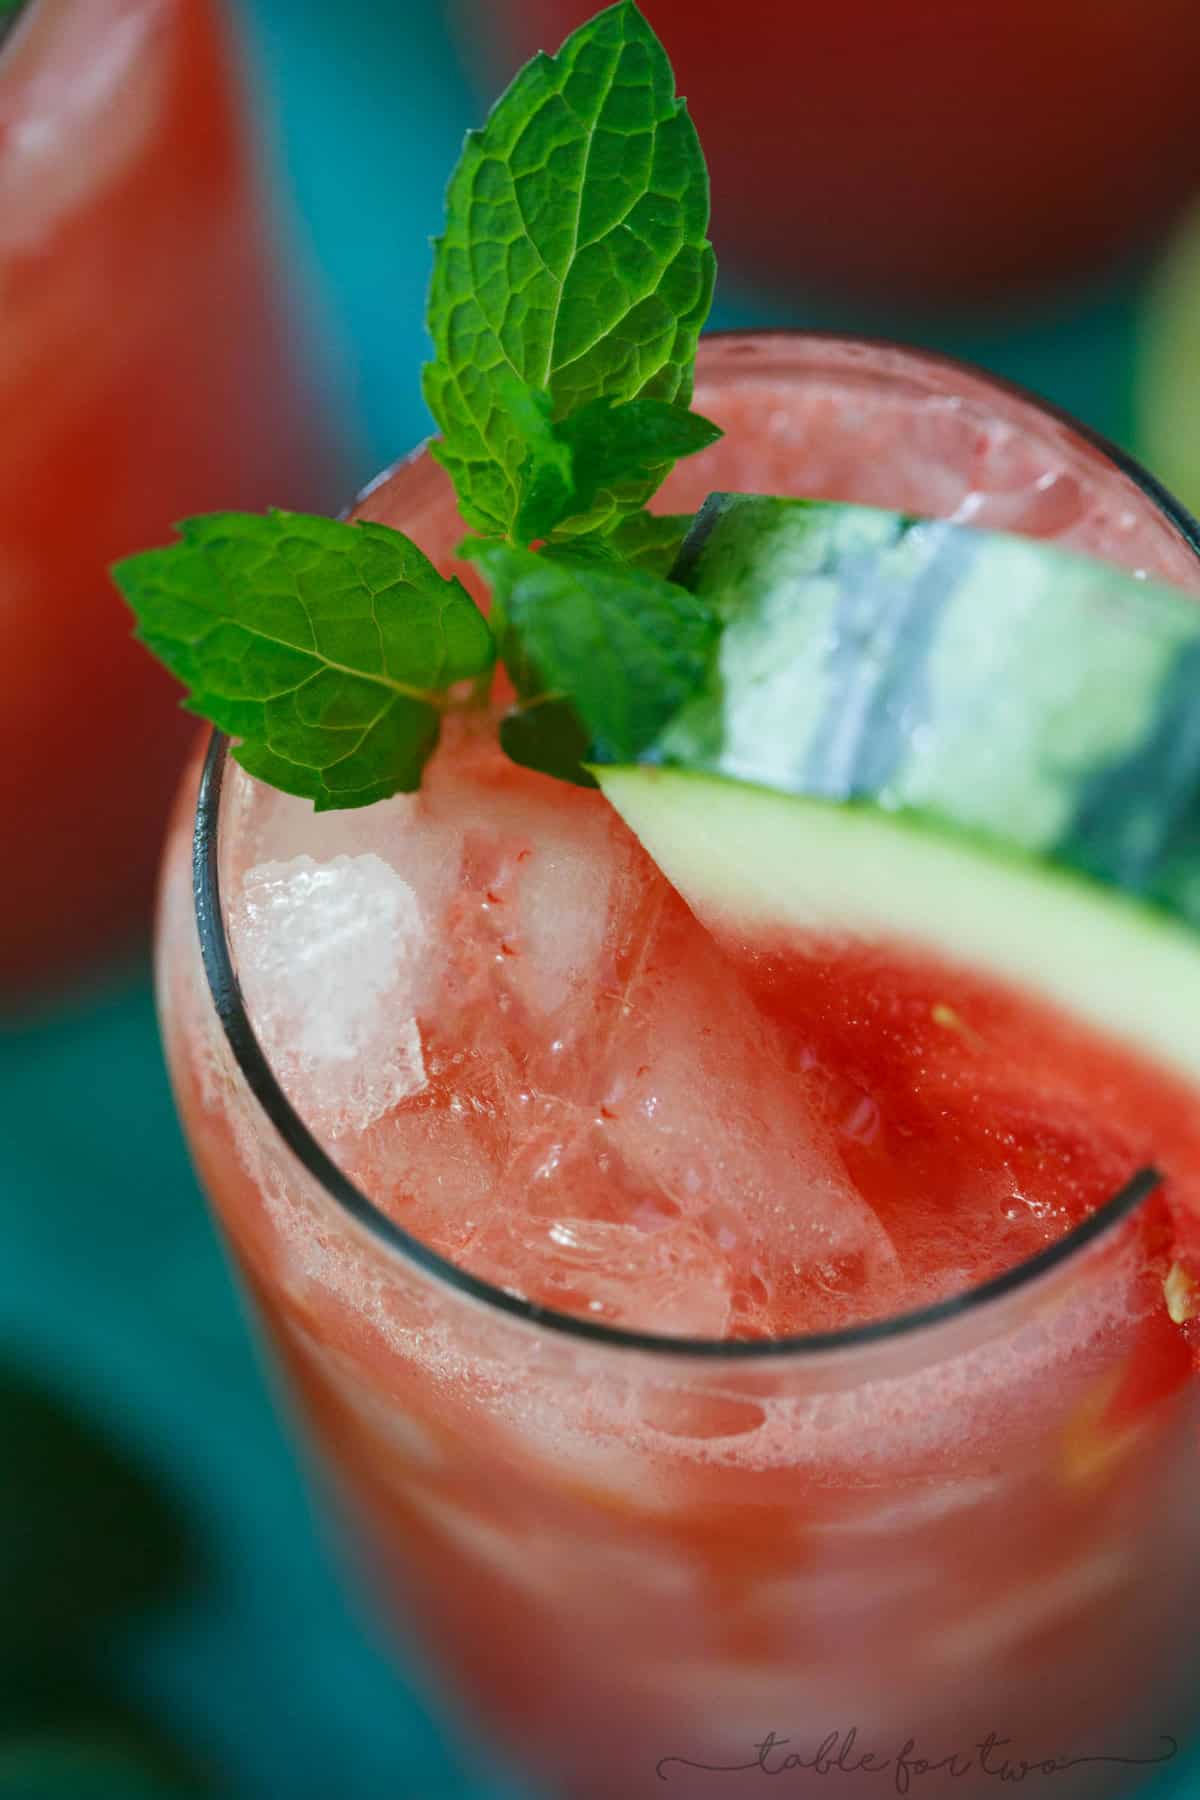 Cool off with this refreshing and easy watermelon mint lime juice! A must for the hot summer days!